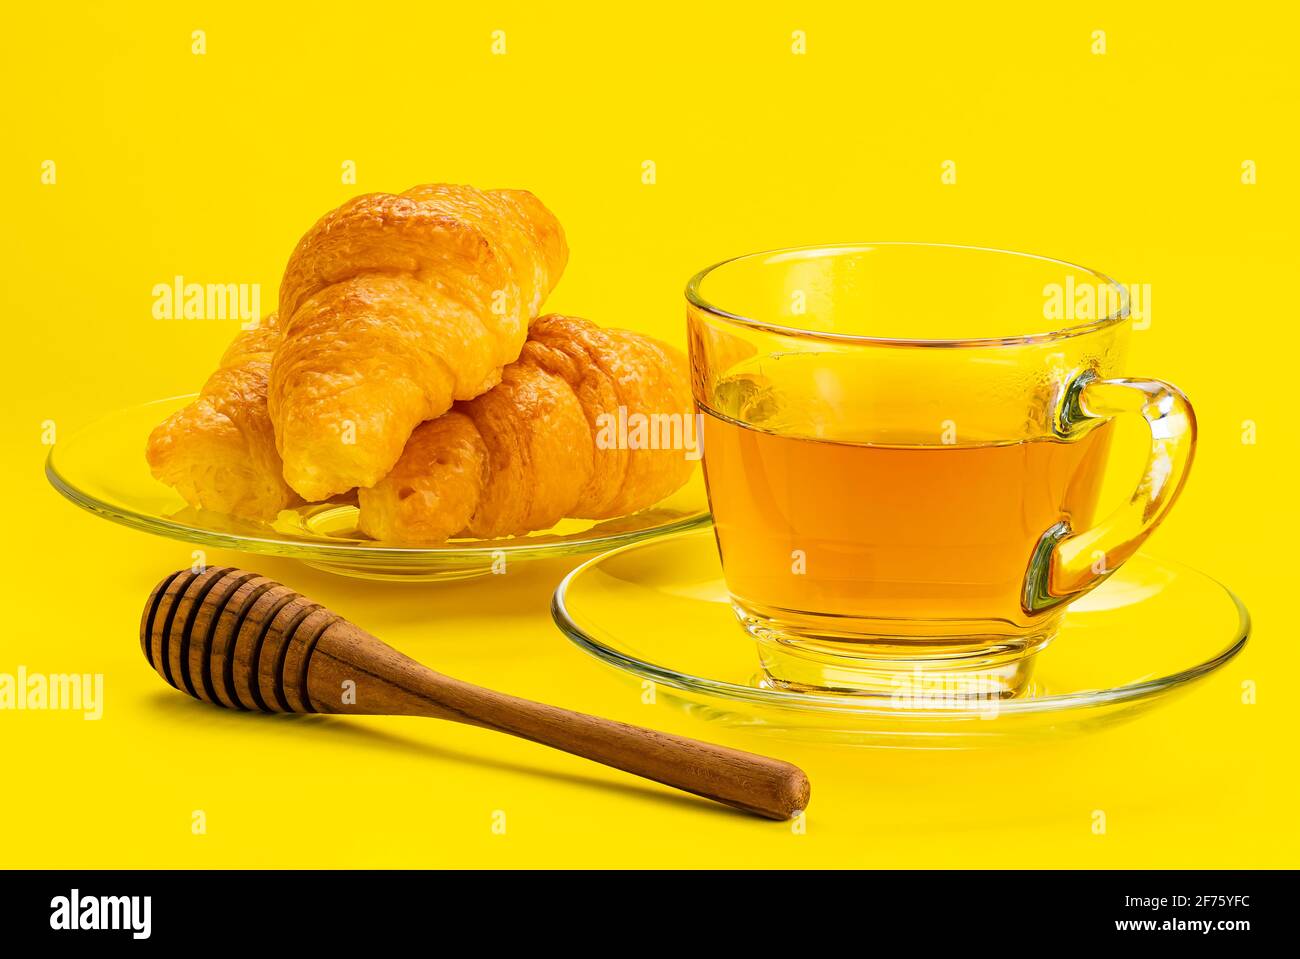 Freshly prepare croissant in a glass plate a cup of tea and a wooden honey dipper on yellow background. Stock Photo